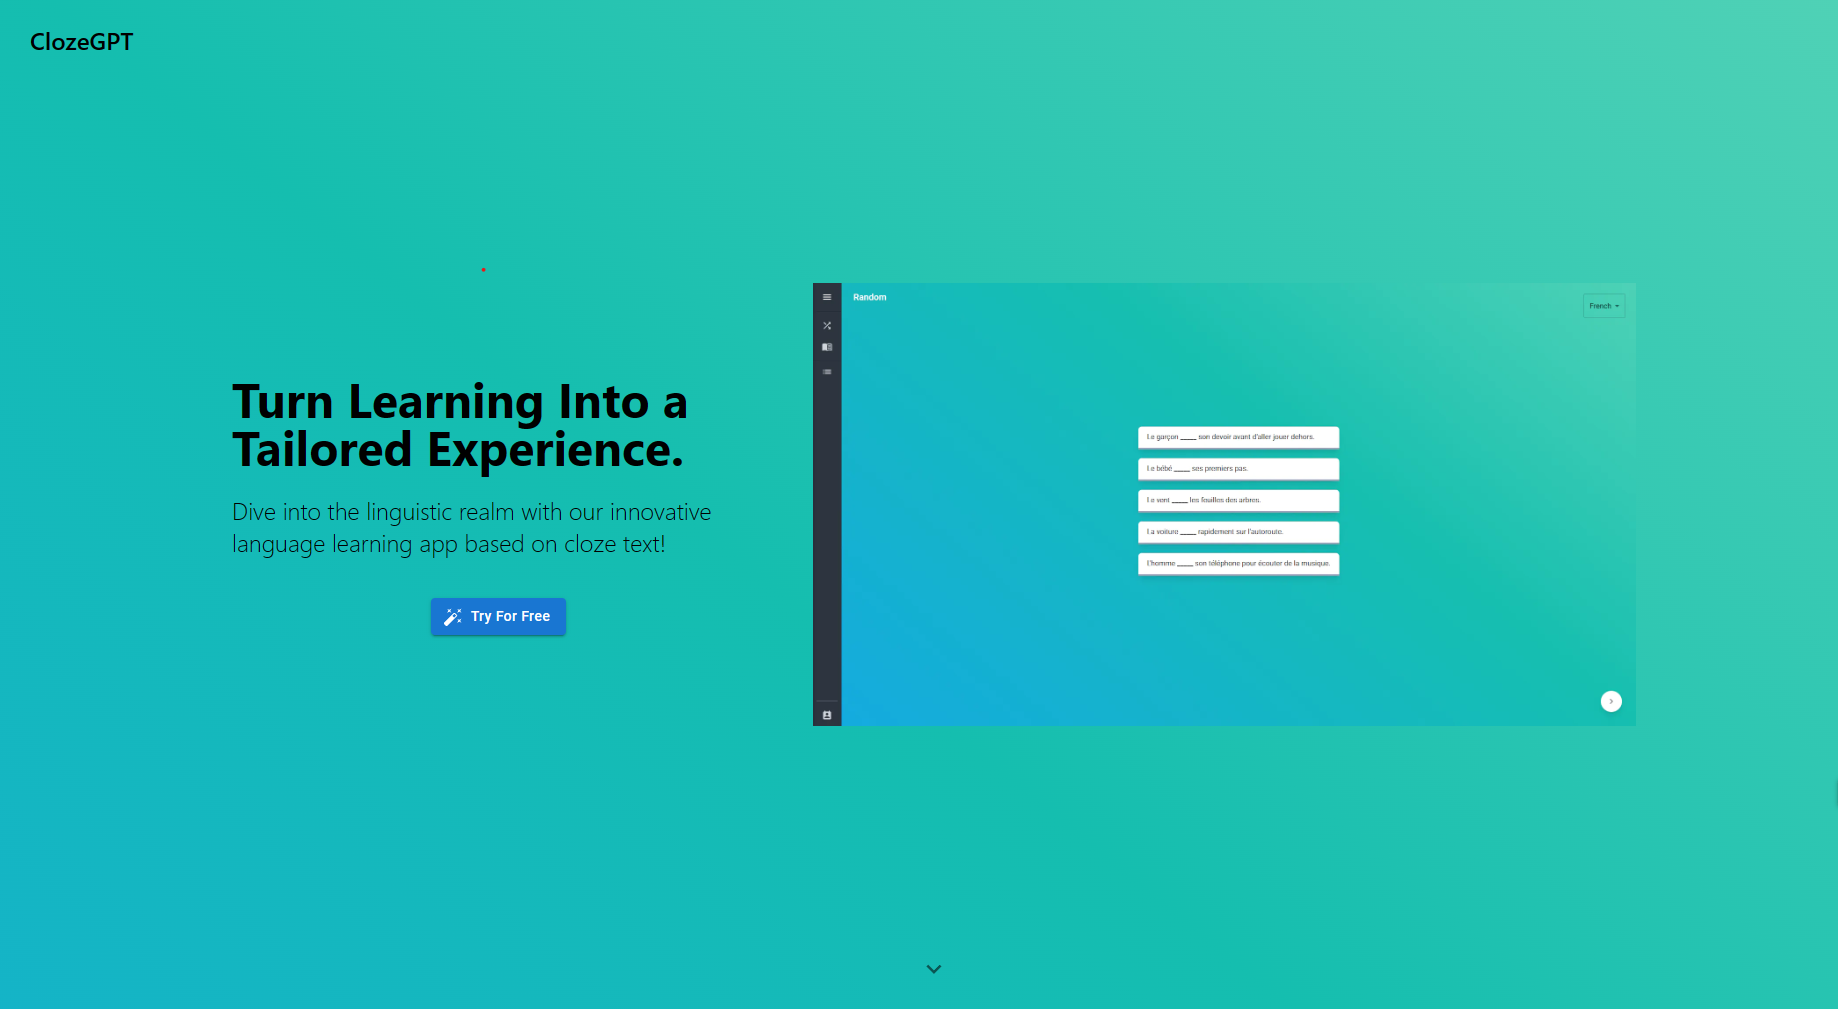 startuptile ClozeGPT-Turn Learning Into a Tailored Experience